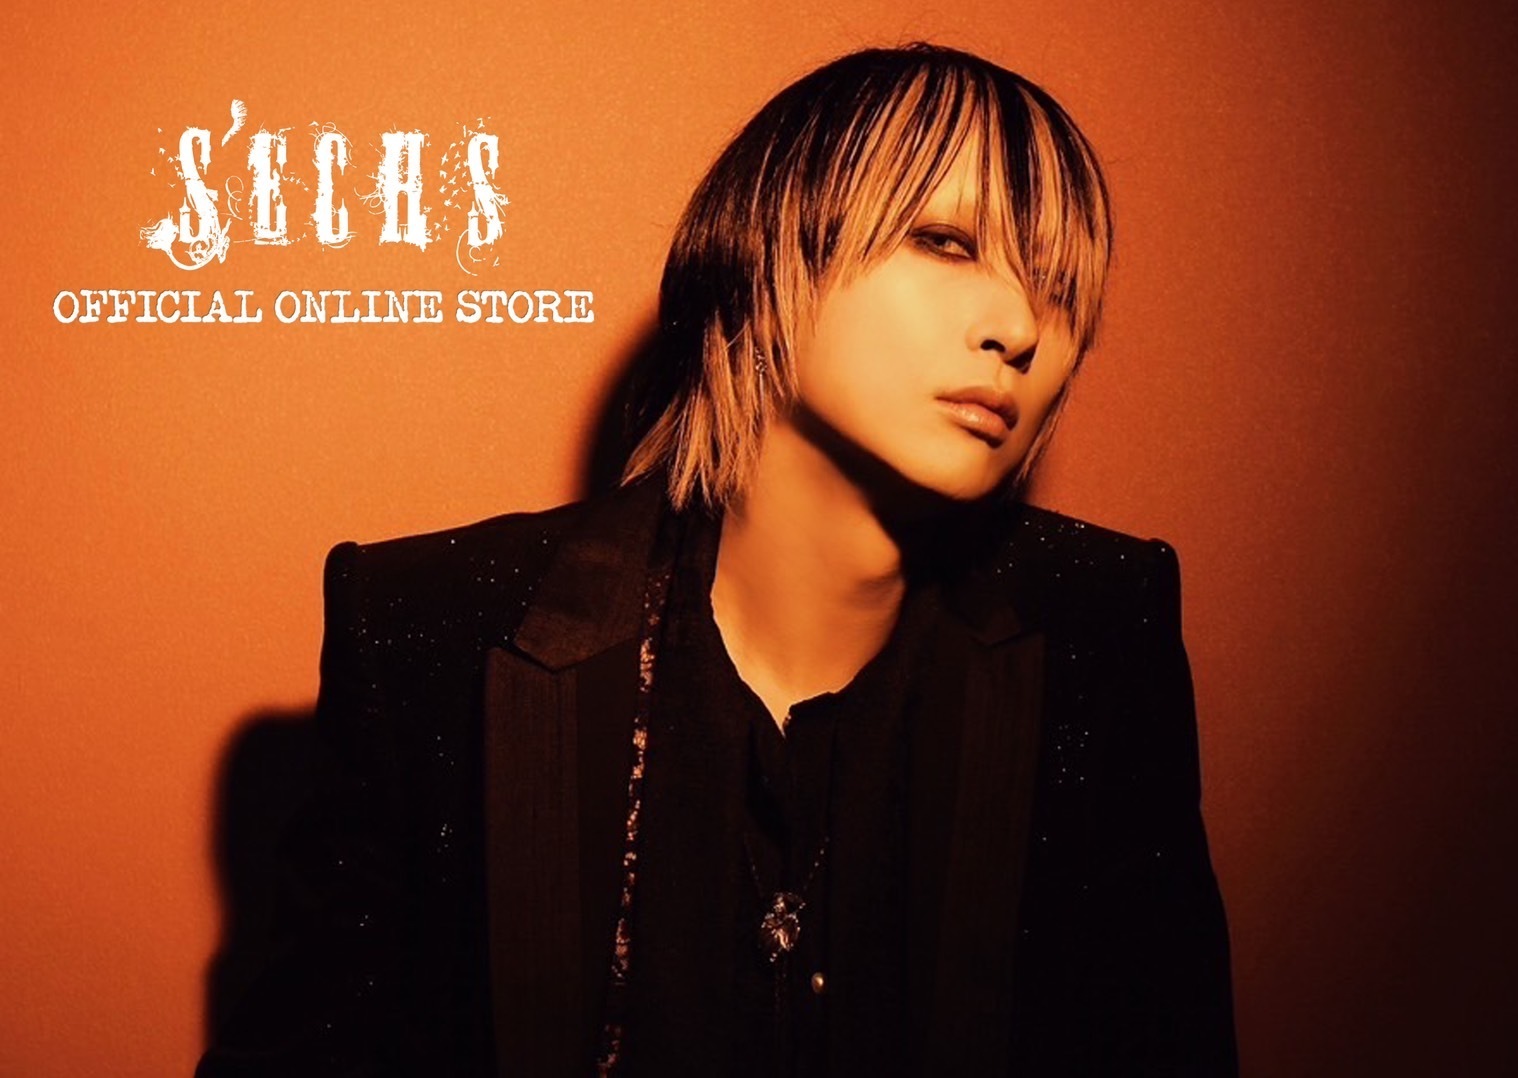 Karyu OFFICIAL STORE